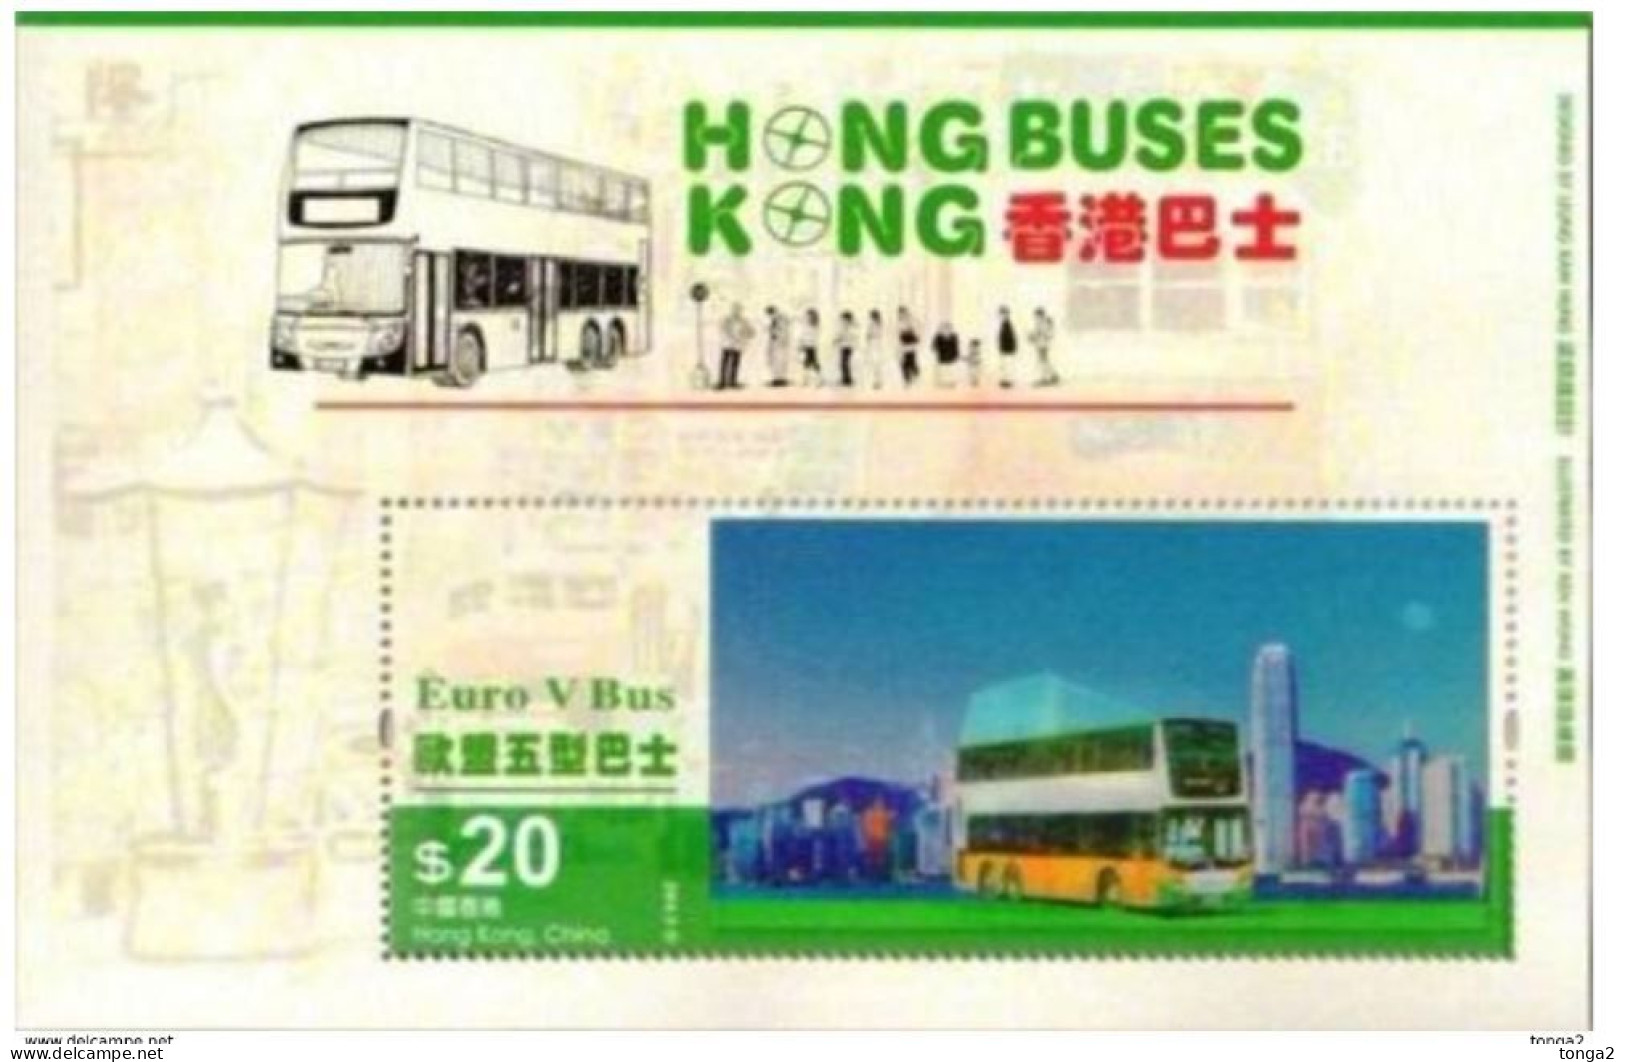 Hong Kong 2013 Bus S/S MNH - Stamp Shows Lenticular Movement - 3-D Pictures Move - Unusual - Bus